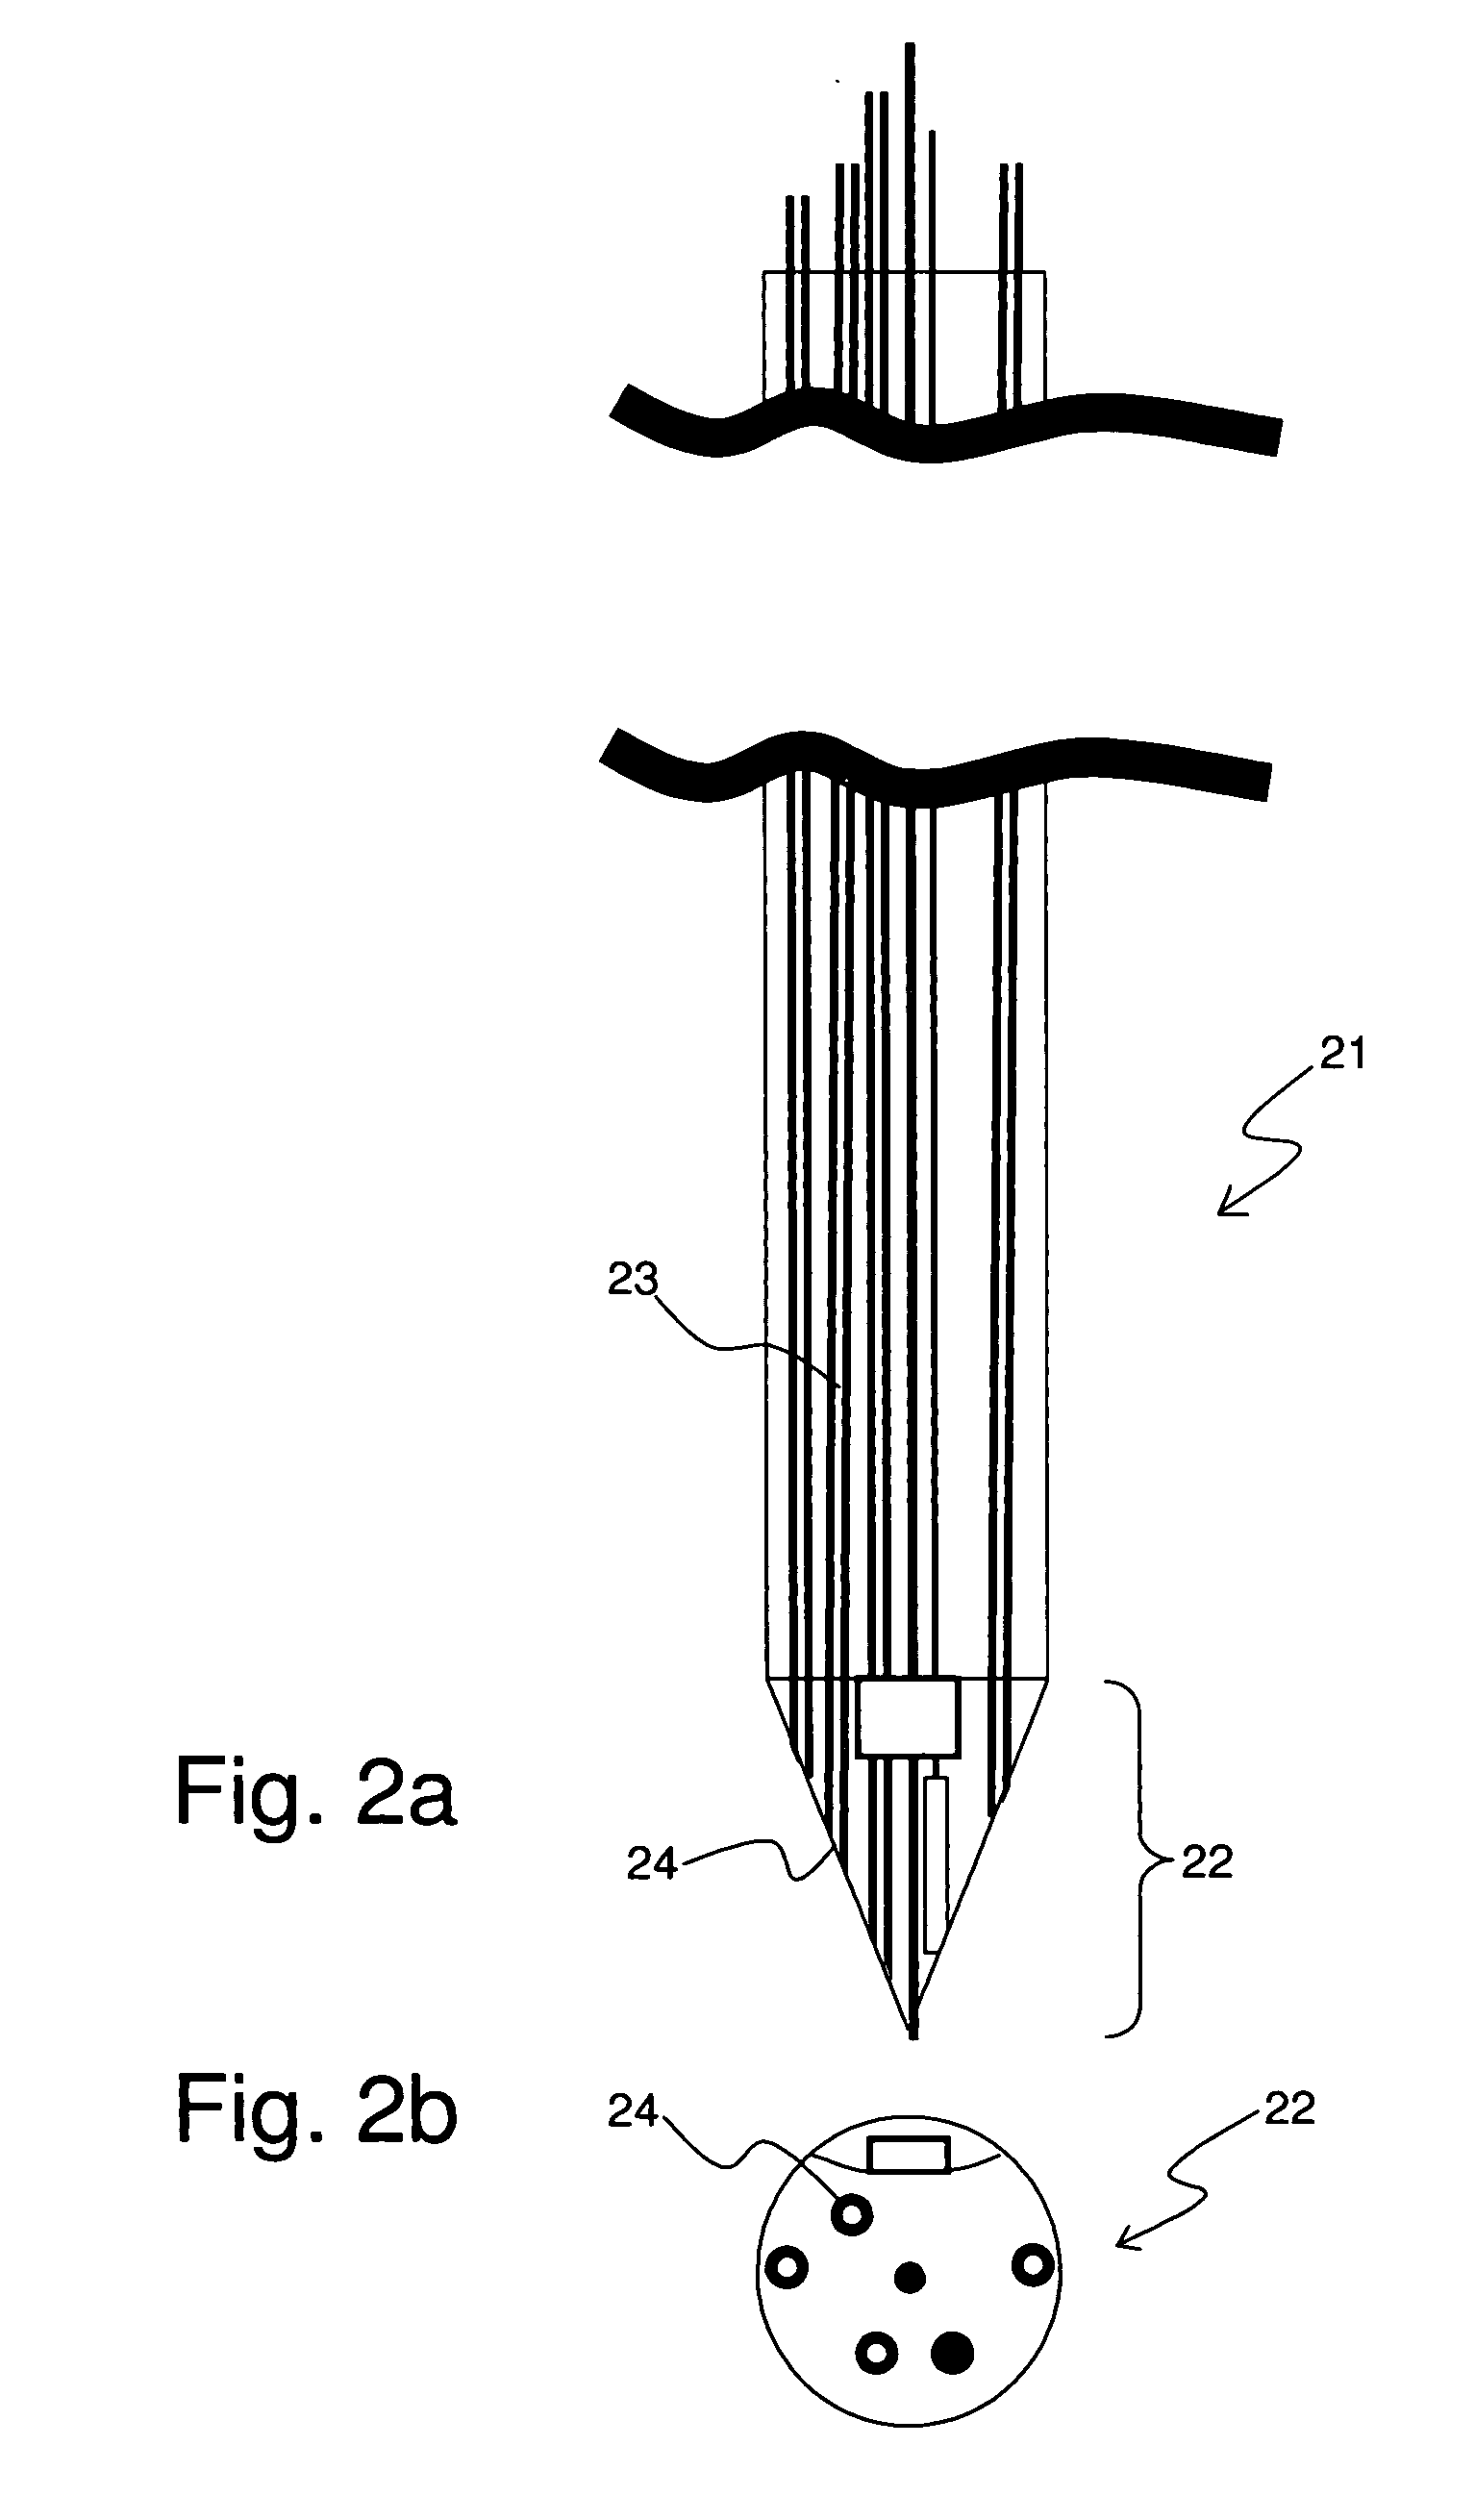 Method and device for the preparation of liquid samples in NMR spectroscopy using a combined titration and pH electrode